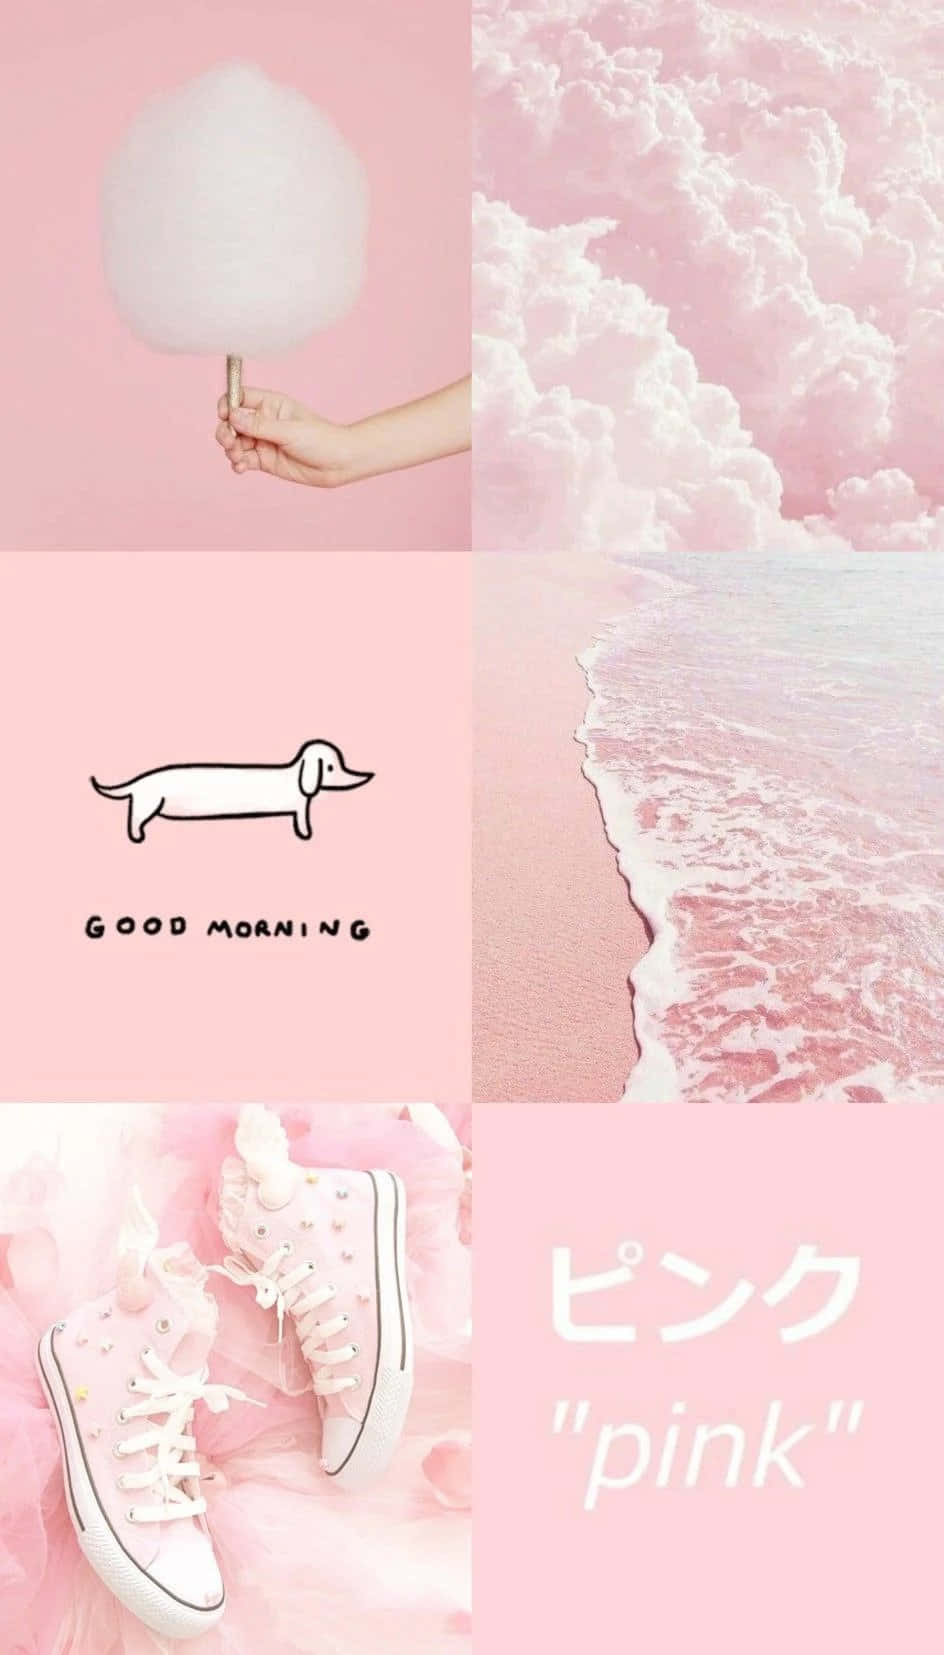 Welcome to the dreamy world of Pastel Pink Aesthetics